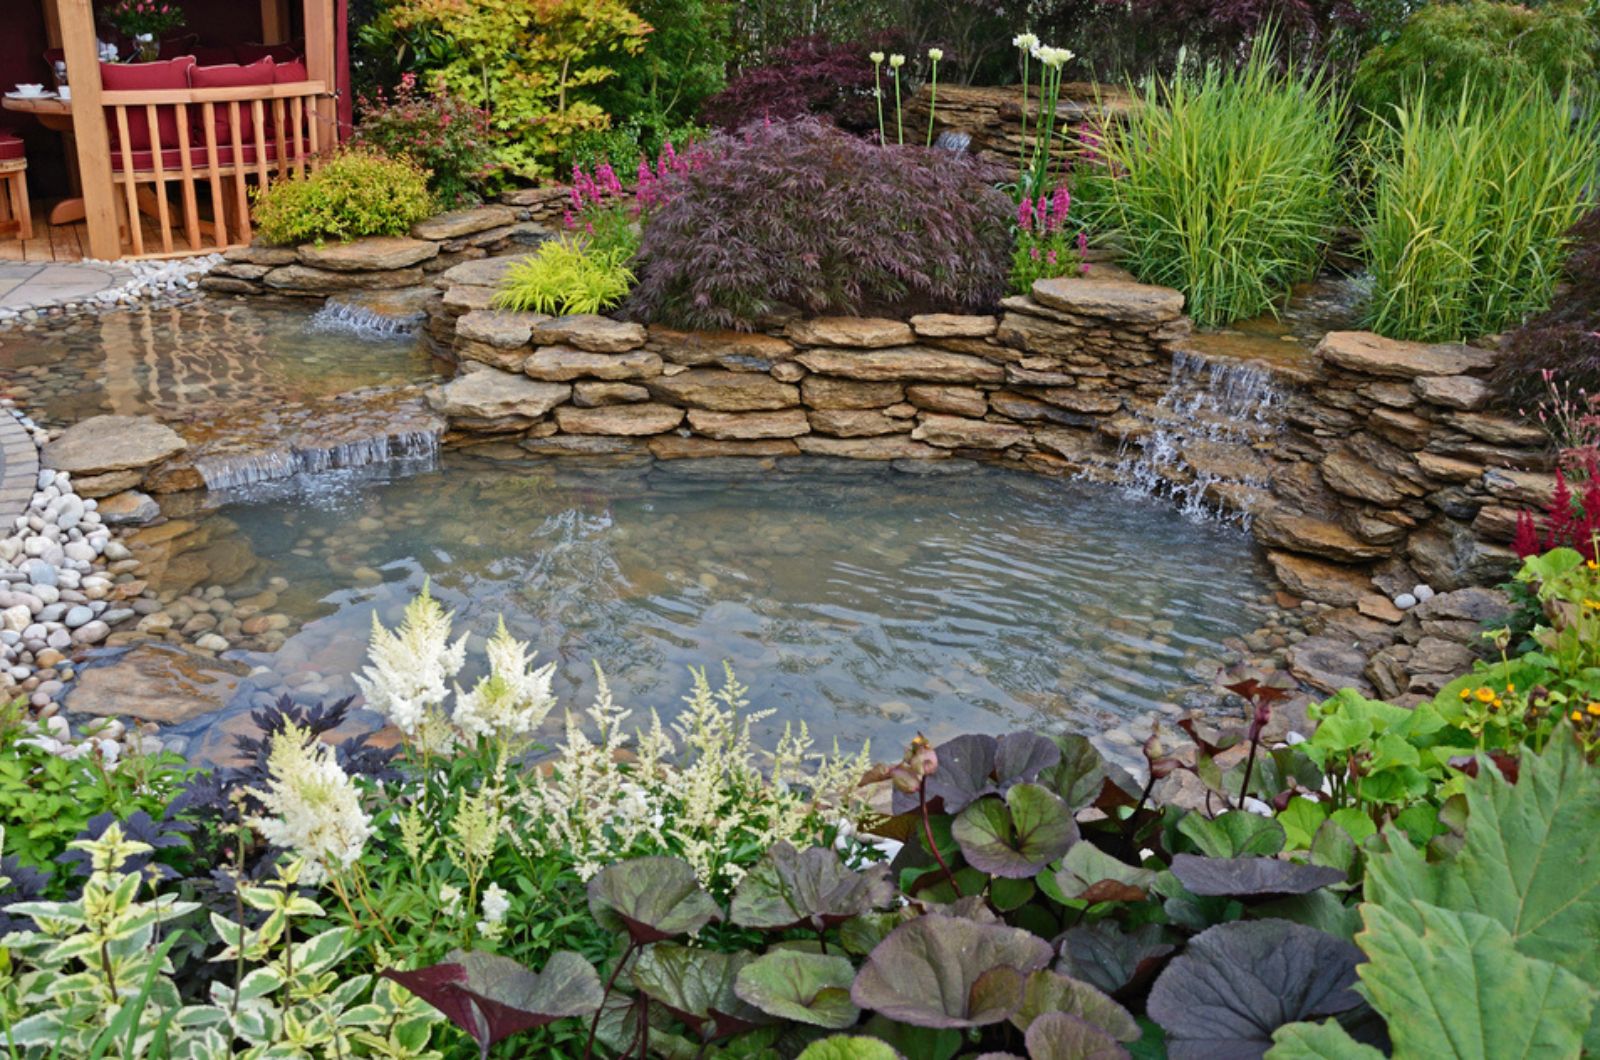 The pond area in an aquatic garden with planted rockery and waterfalls